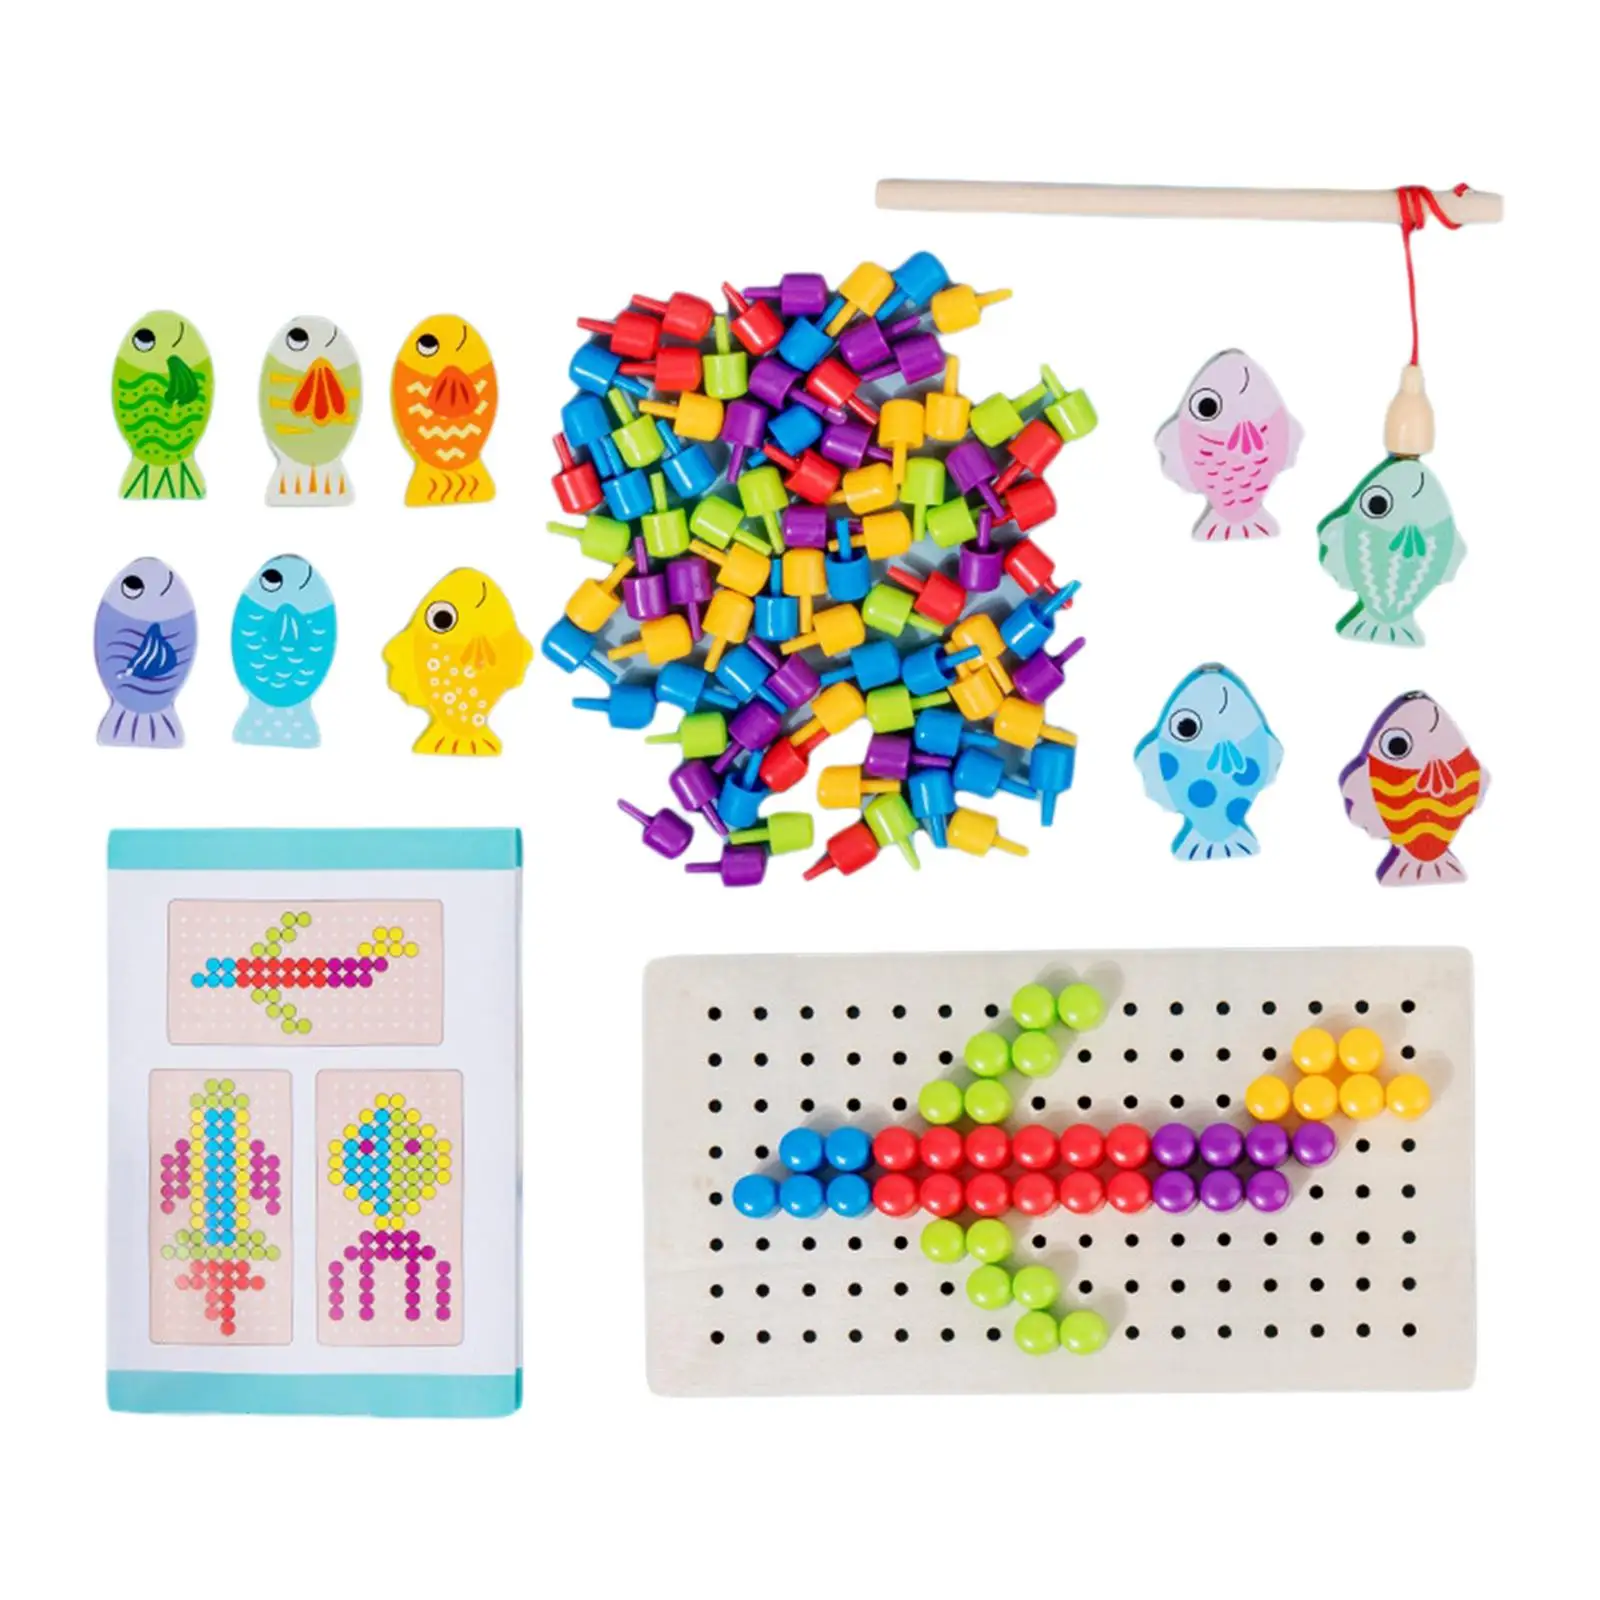 Fishing Toys including Fishes and Fishing Poles Novelty Fishing Game Play Set Fishing Board Game for Toddlers Boys Kids Children